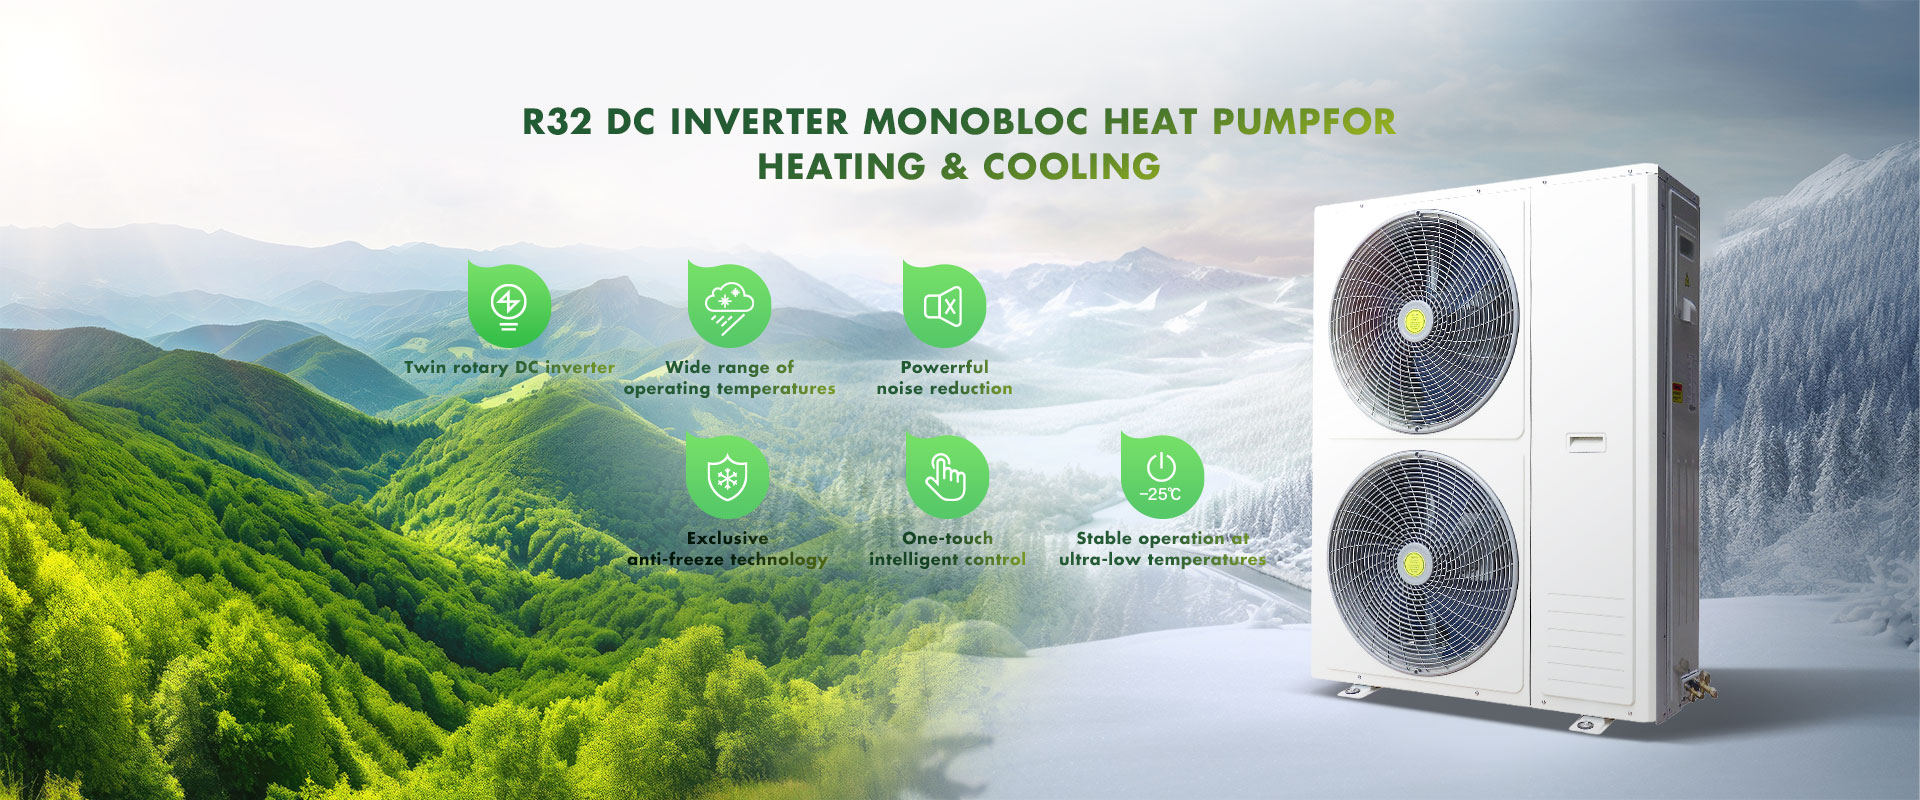 heat pump for heating & cooling